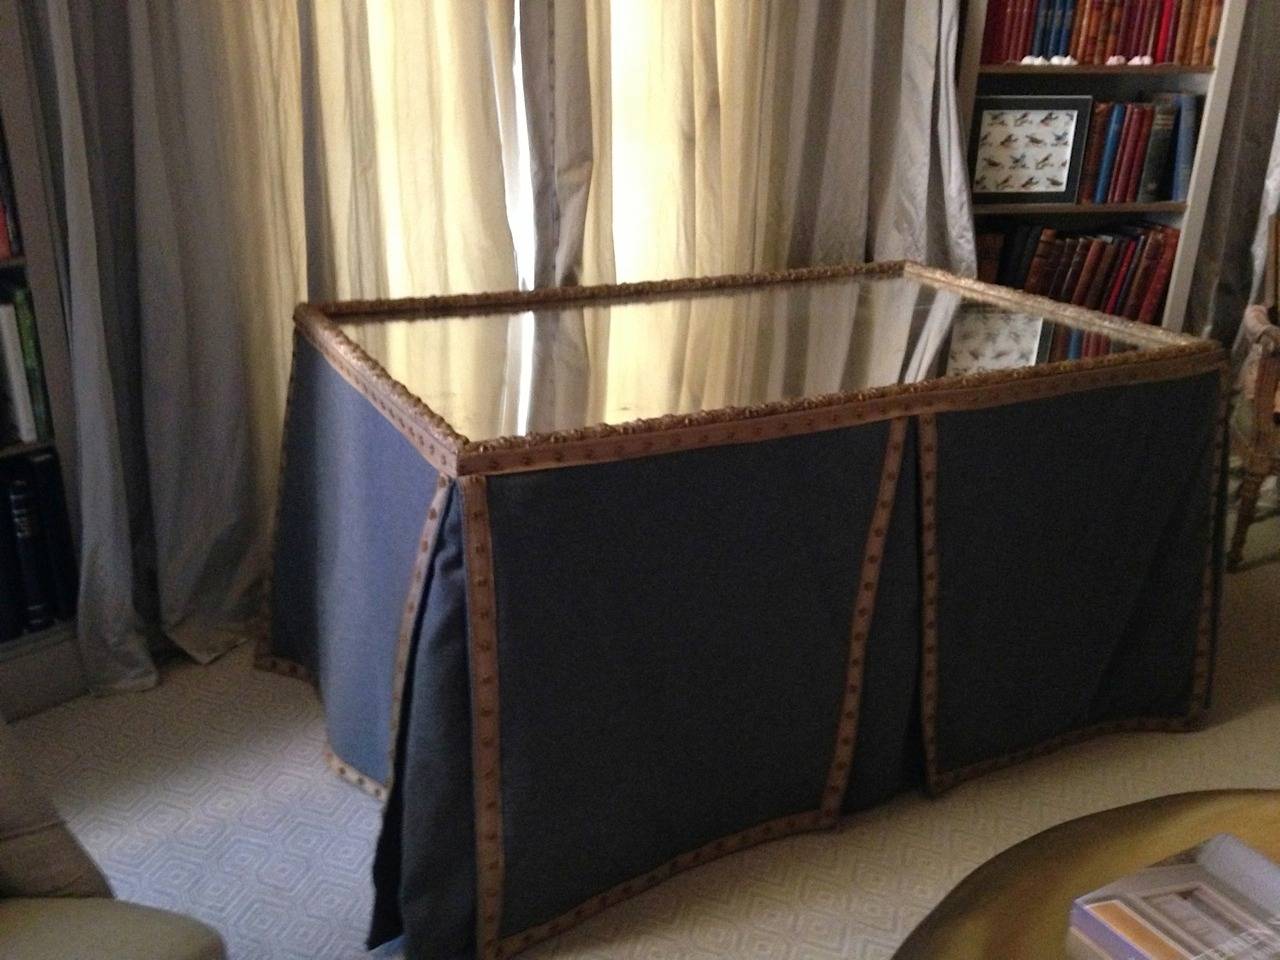 19th century French mirror with old glass and gold leaf frame forms the top of this purpose-built custom dressing table. The fabric skirt is lined grey wool with Samuel and Sons gold braid edging. There are knife pleats in the center and at the